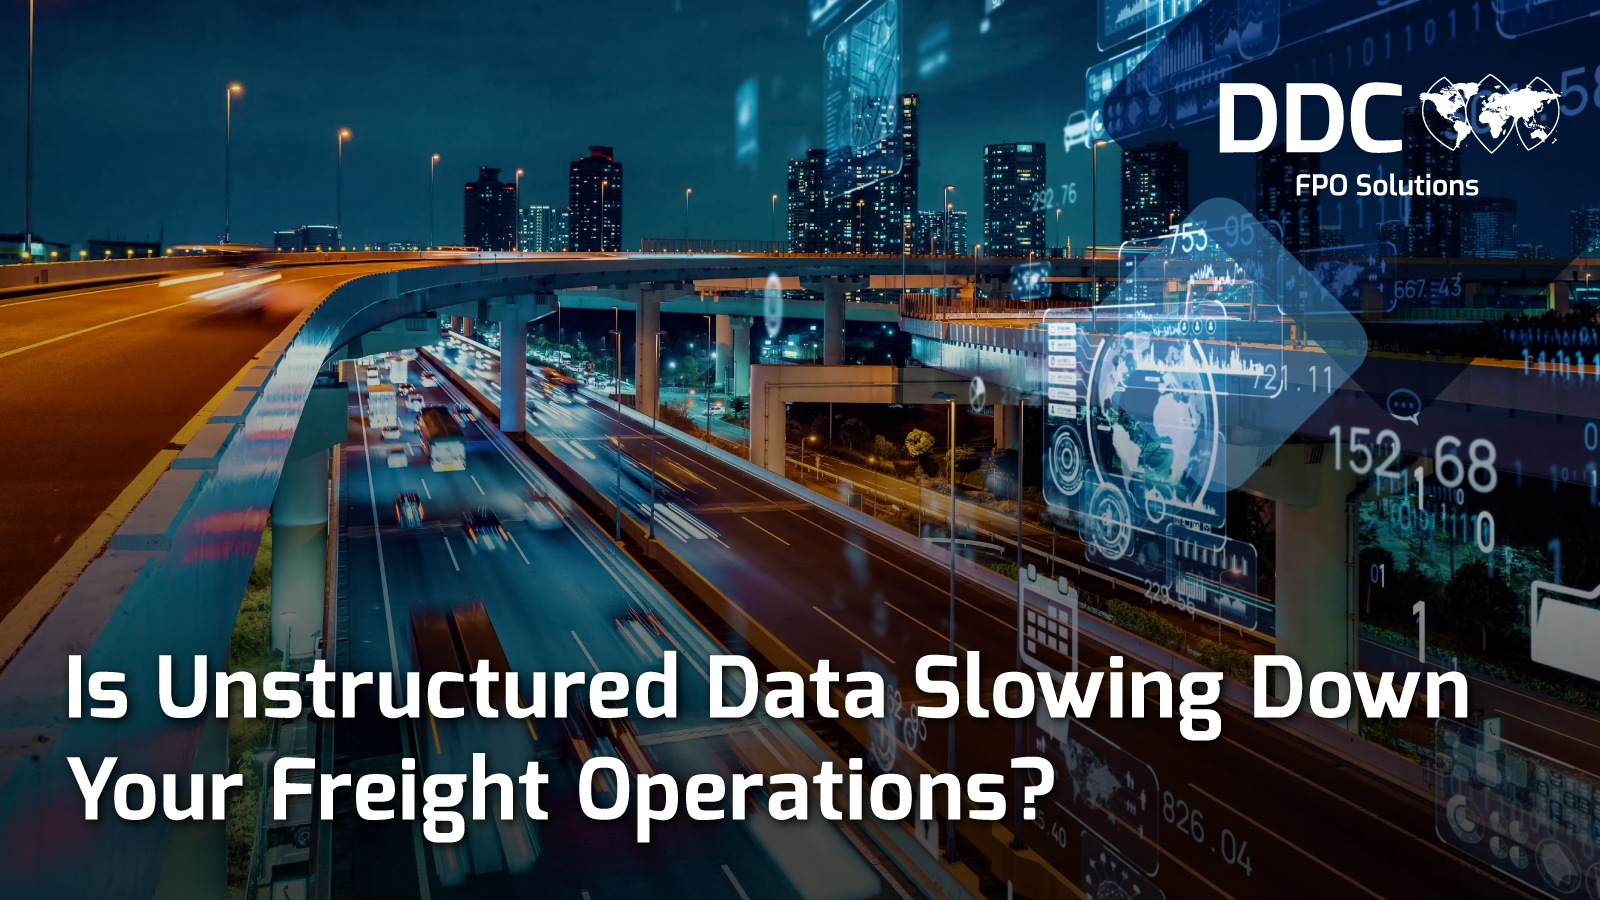 Is Unstructured Data Slowing Down Your Freight Operations?